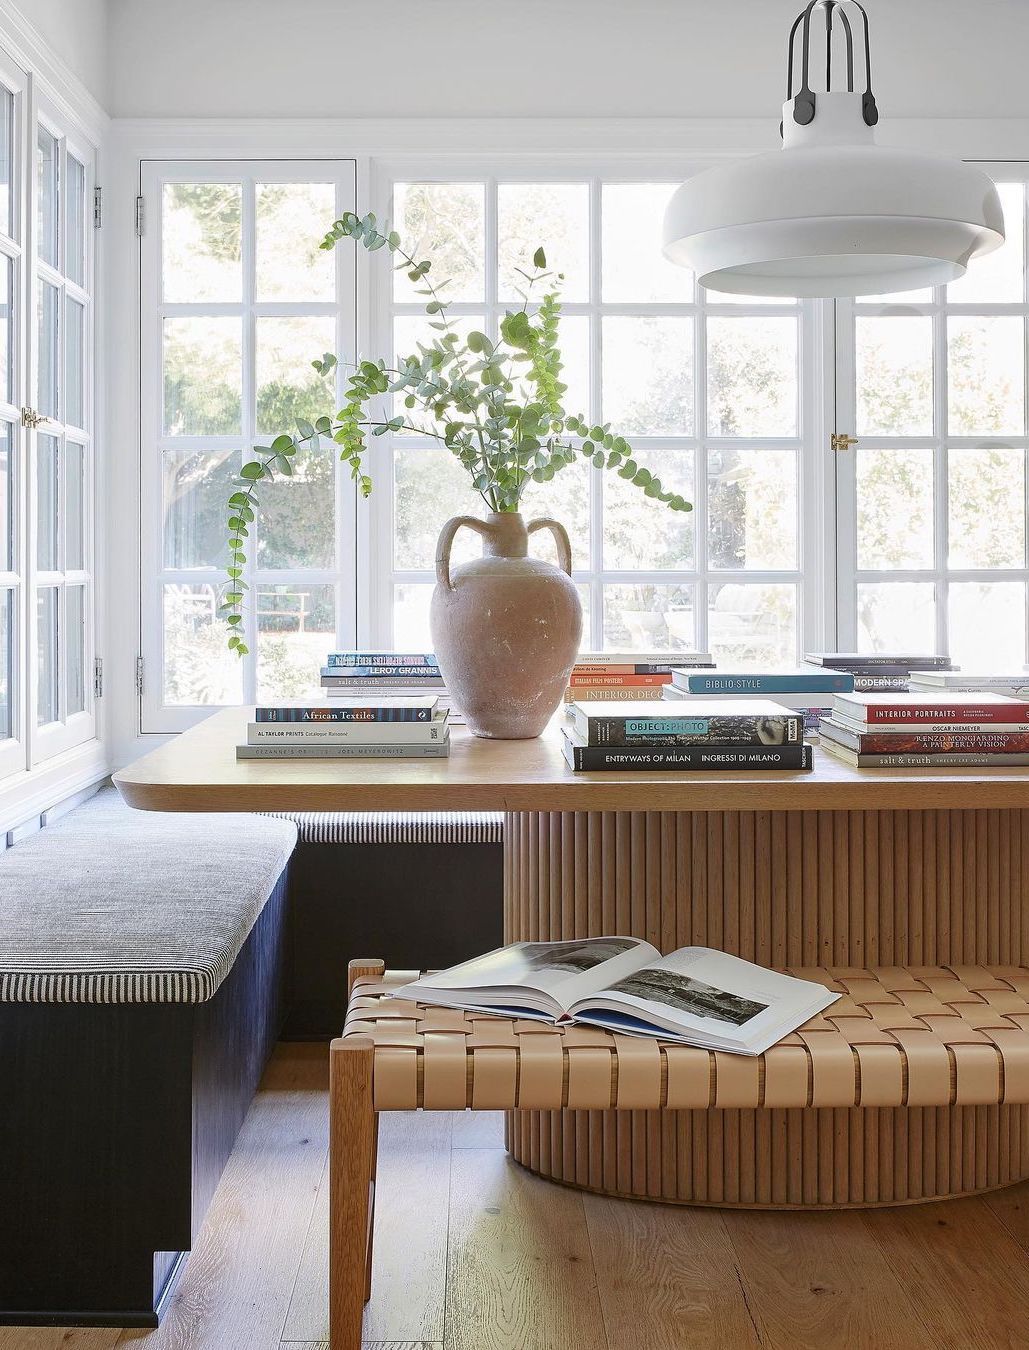 7 unexpected places to put benches in your home